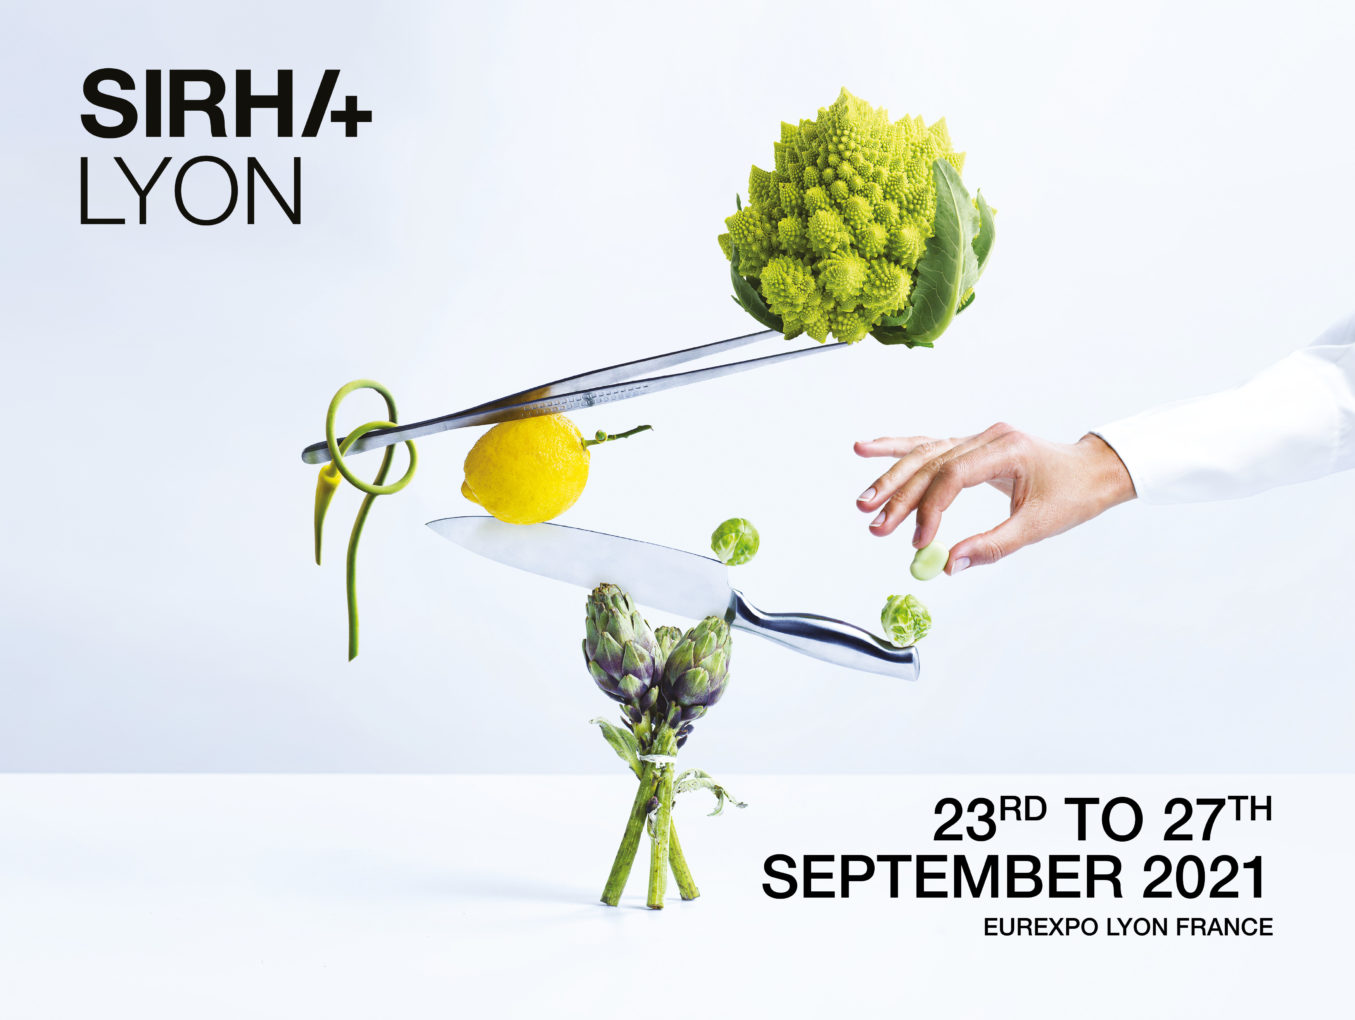 Visit us in September at the Sirha trade show!